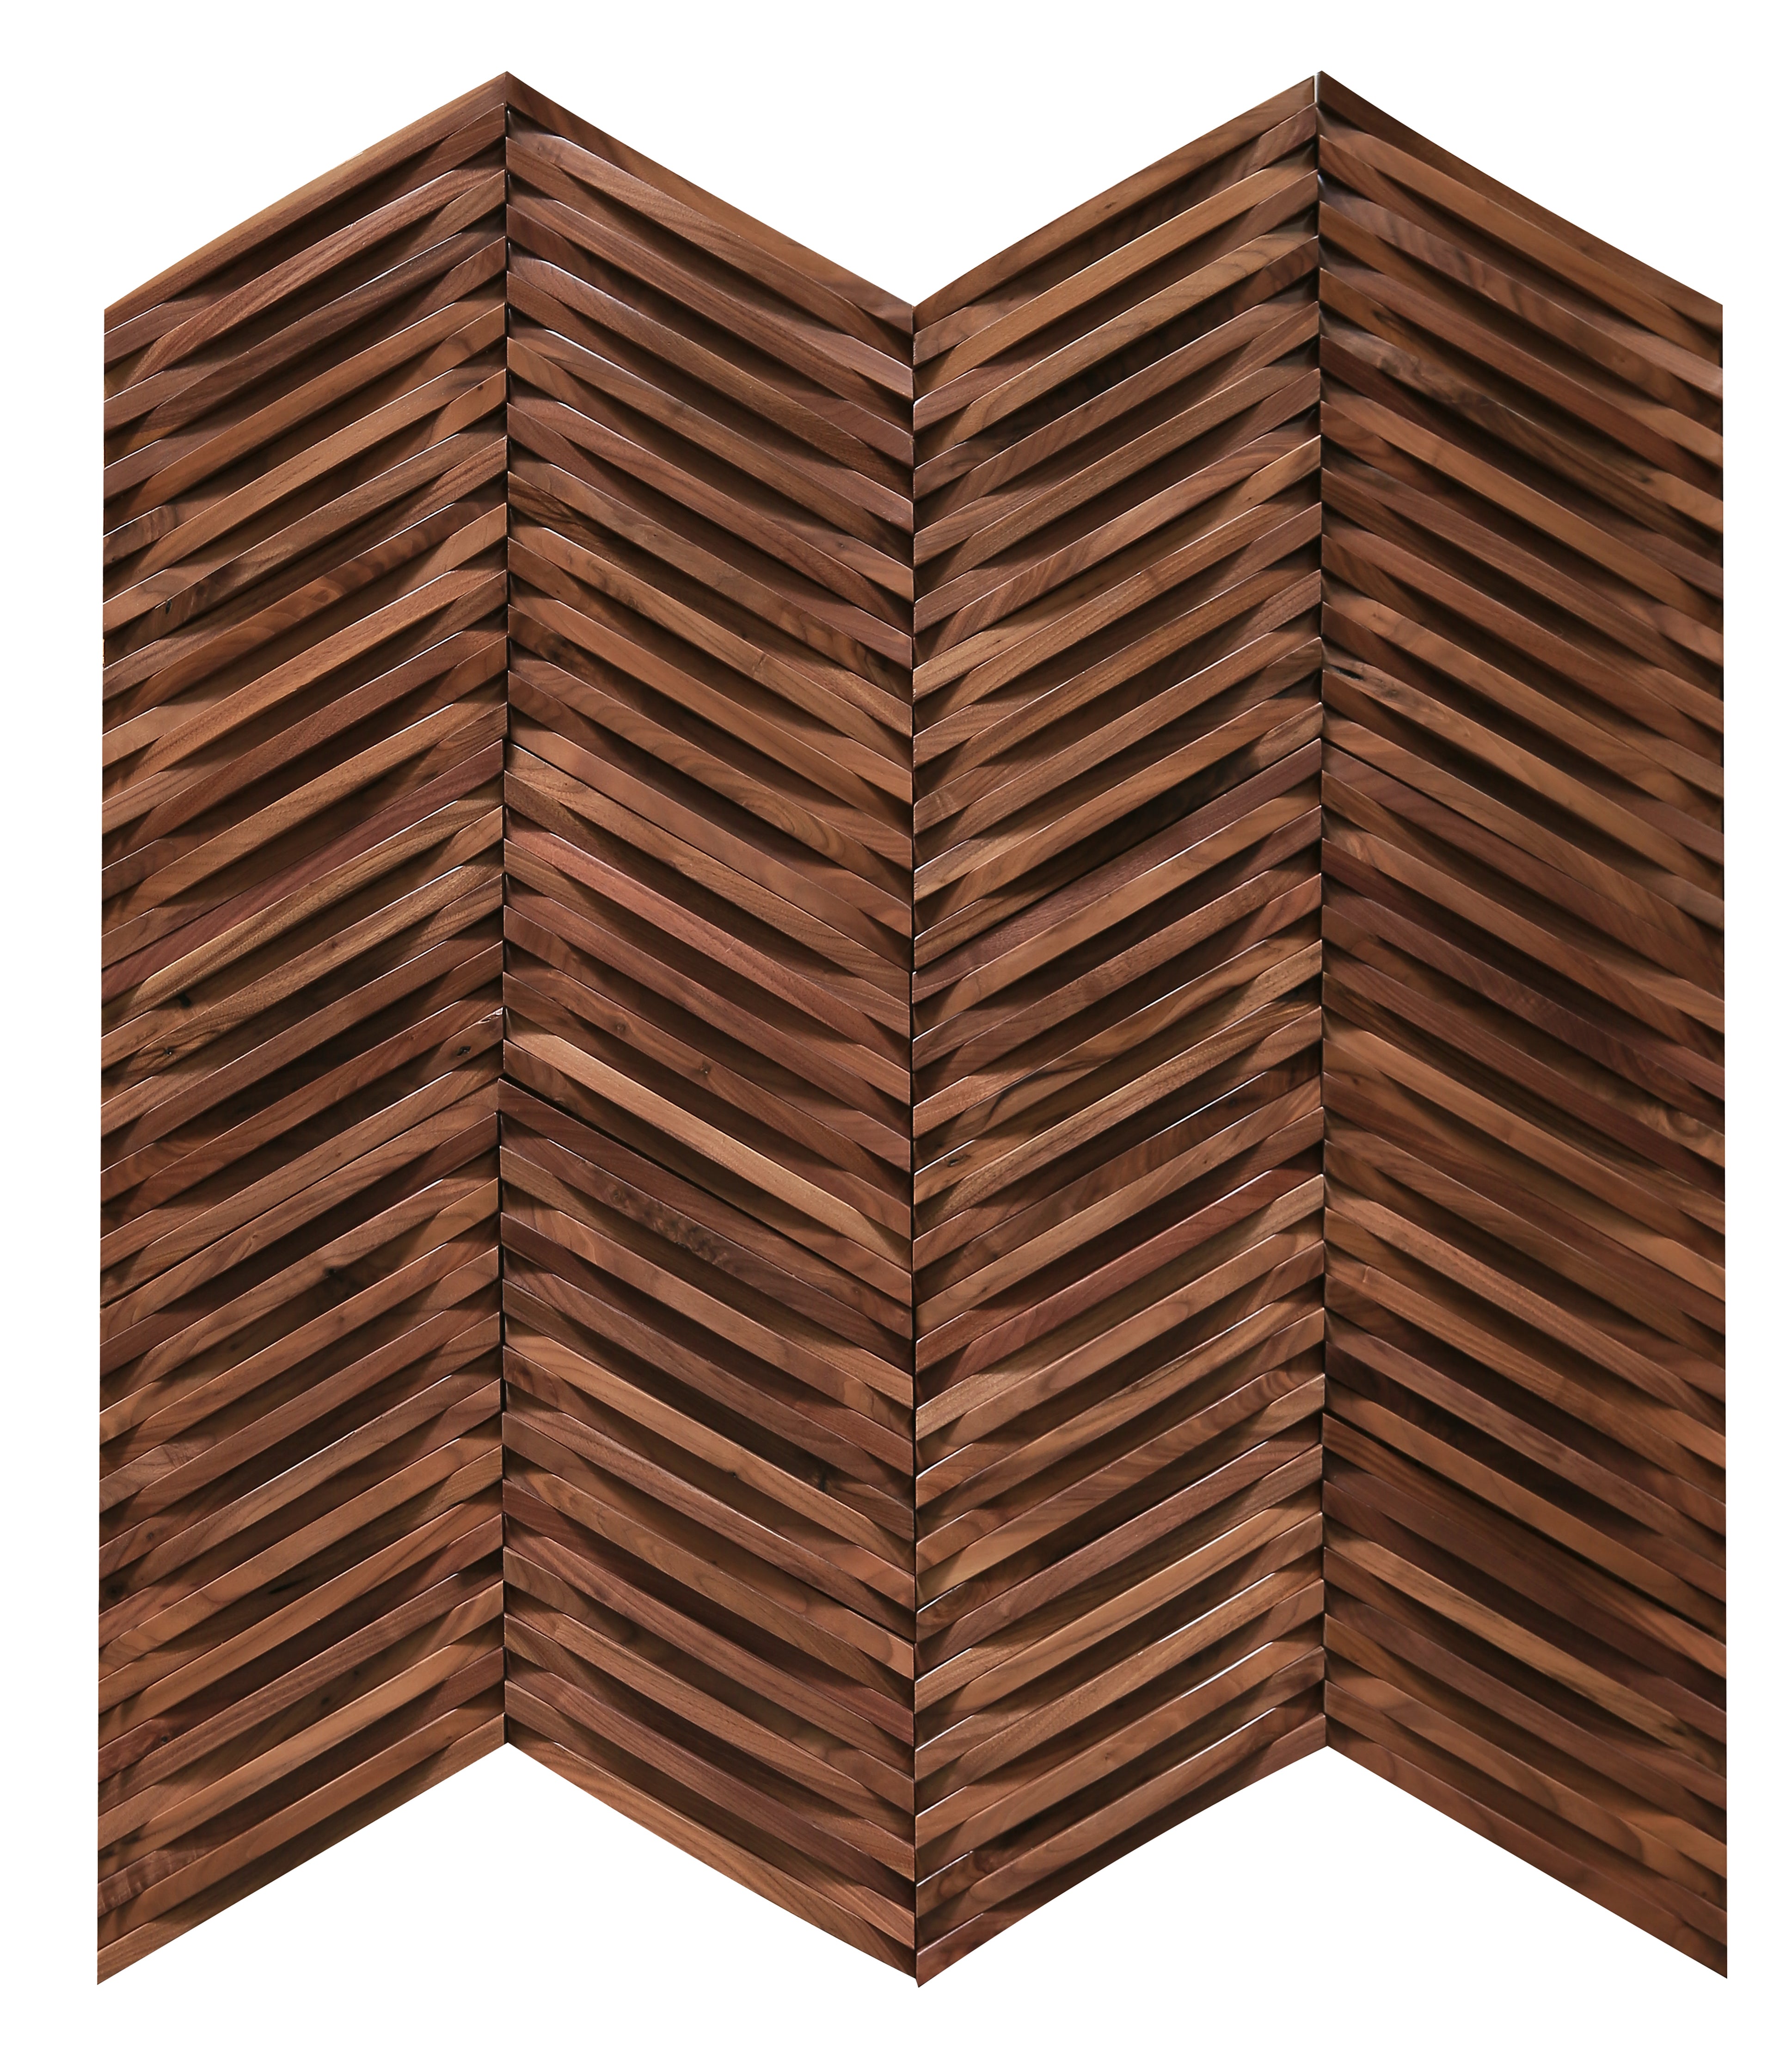 duchateau inceptiv curva chevron american walnut three dimensional wall natural wood panel conversion varnish for interior use distributed by surface group international